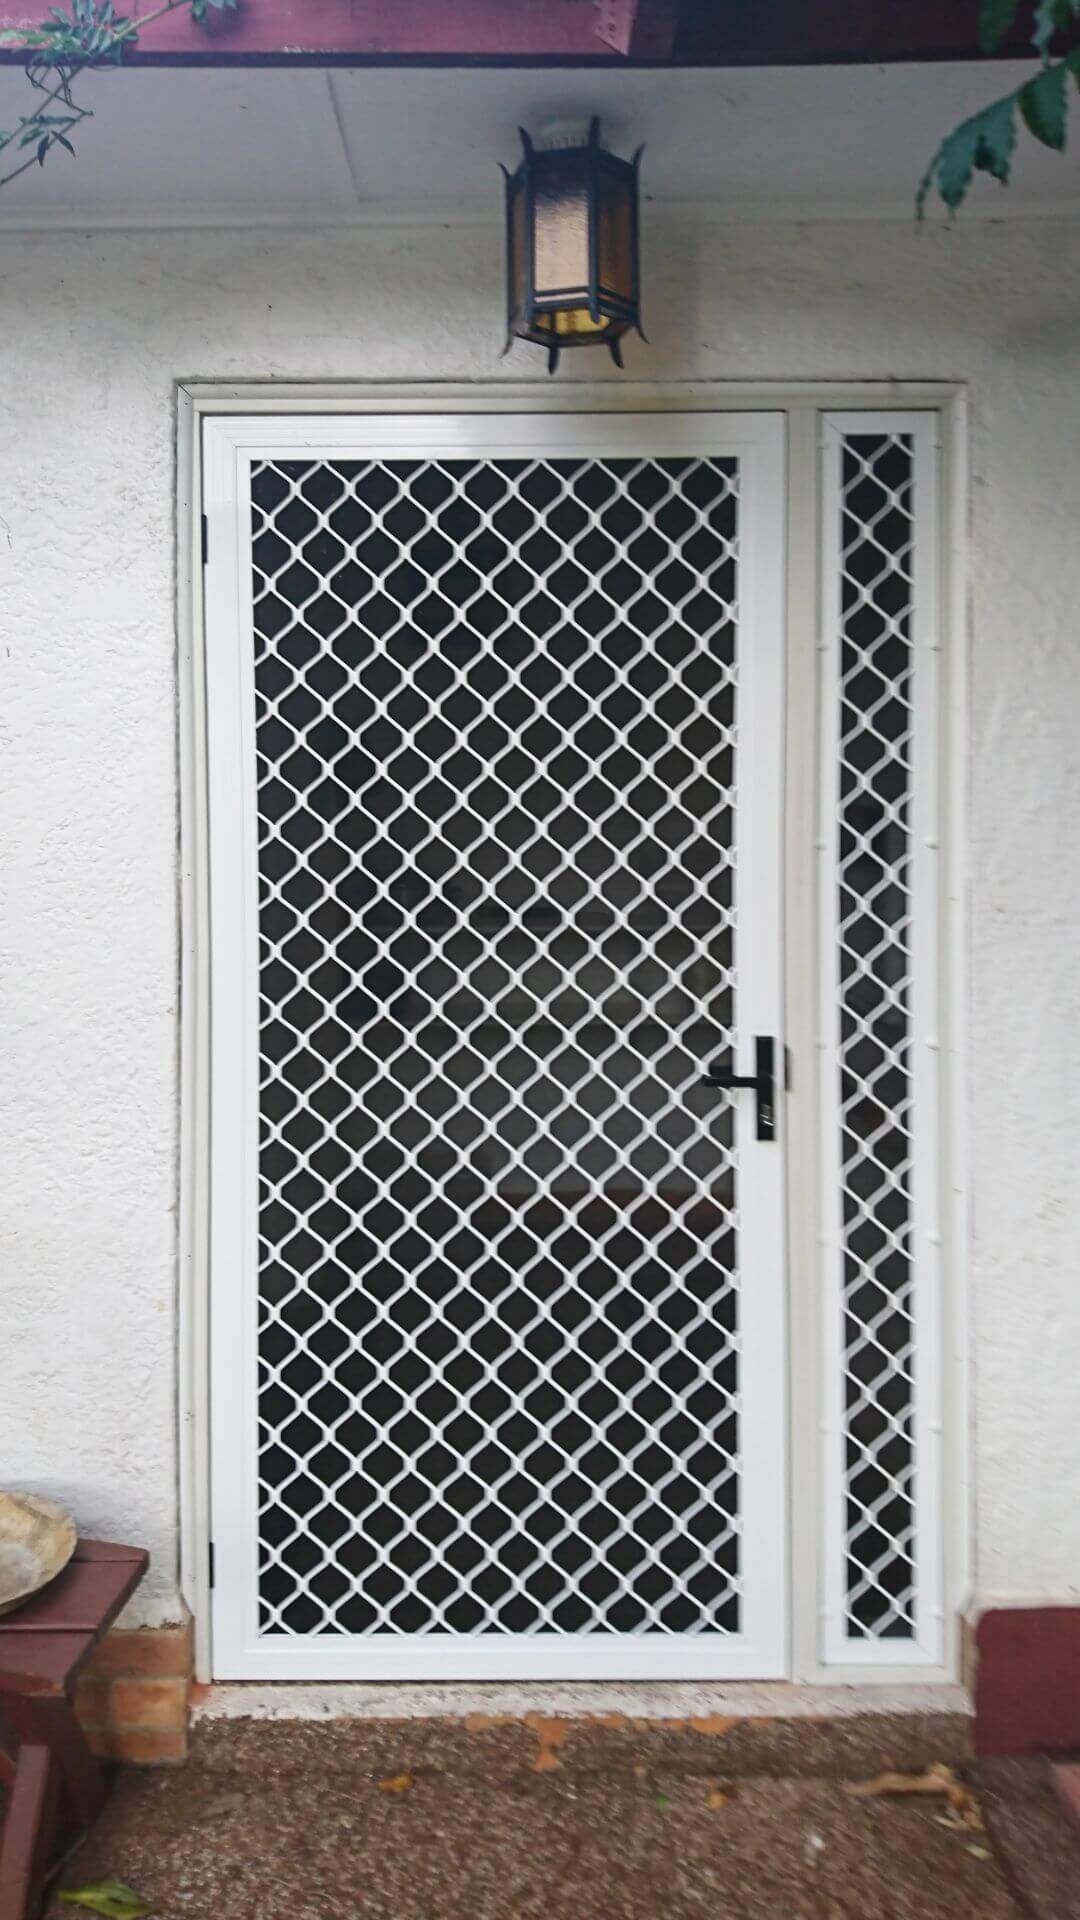 Doors Plus-External-Entrance-Nubreeze-Safety screen door-with side grill-with grill design on it-in white finish